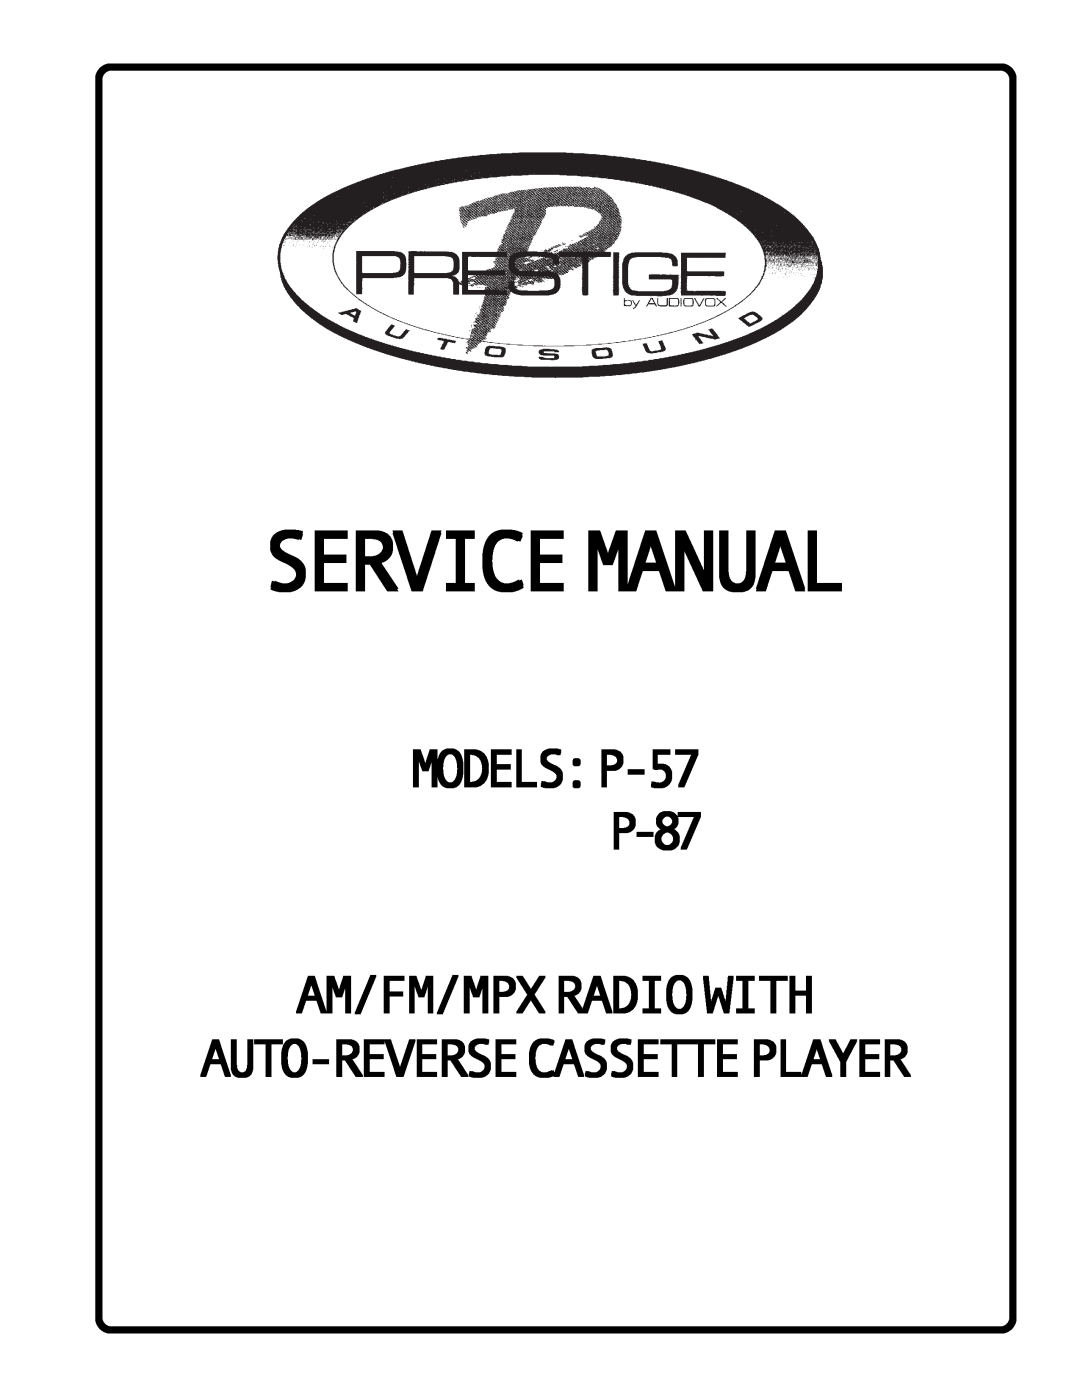 Audiovox service manual Servicemanual, MODELS P-57 P-87 AM/FM/MPXRADIOWITH, Auto-Reversecassetteplayer 